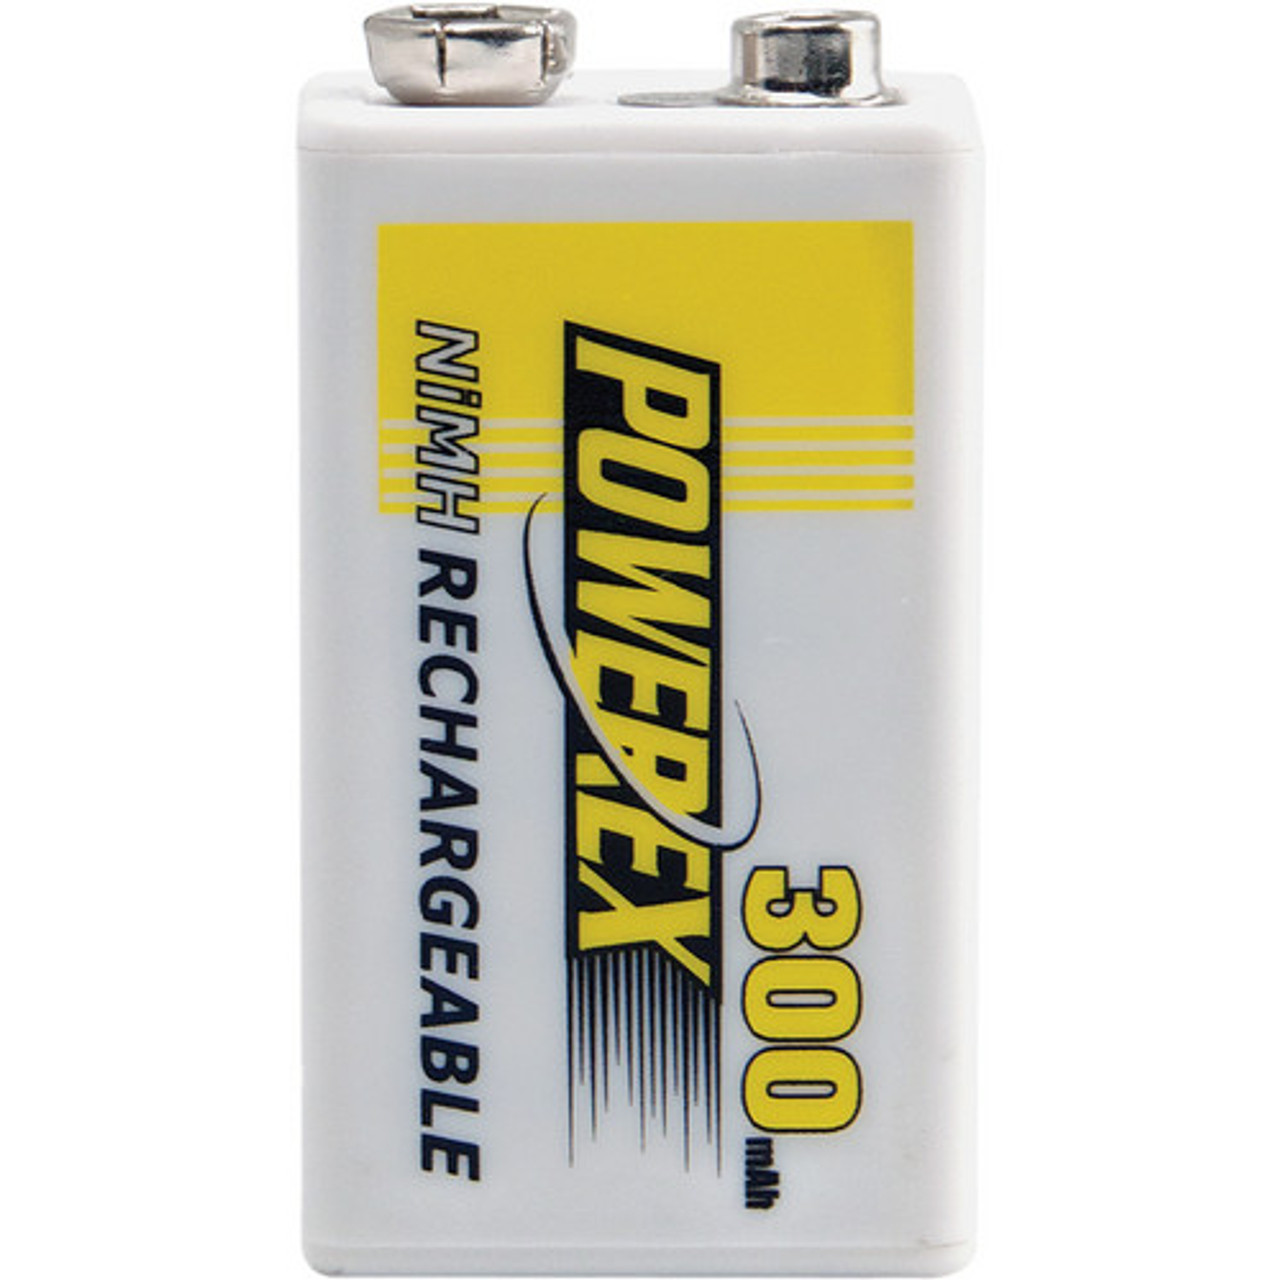 Rechargeable Batteries  Powerex by Maha Energy